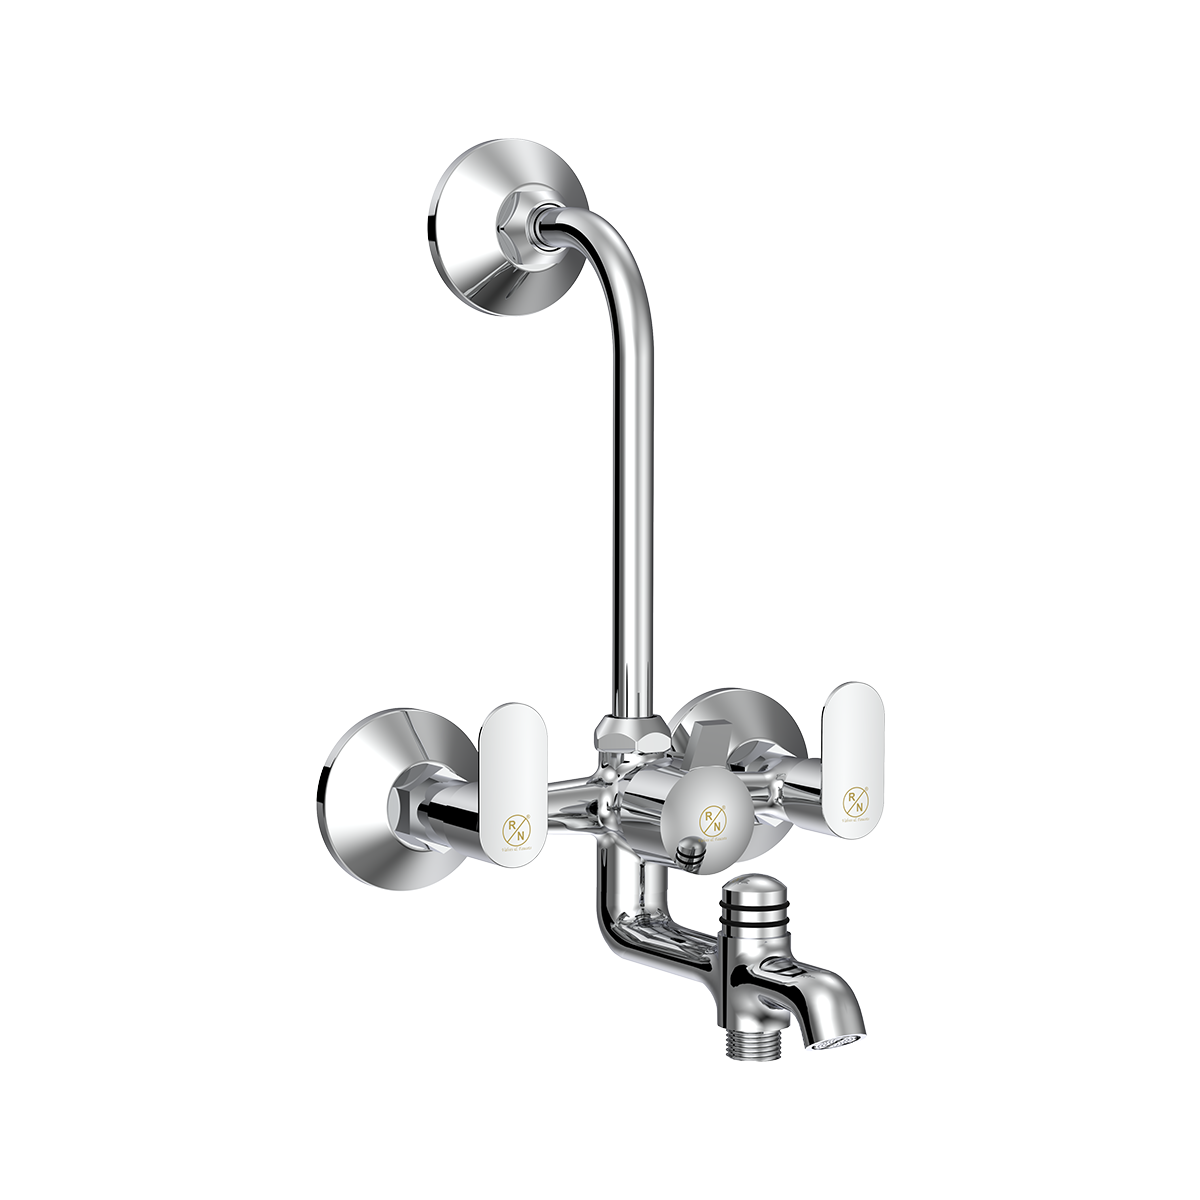 3 In 1 Wall Mixer With Provision For Both Overhead & Hand Shower With L-Bend